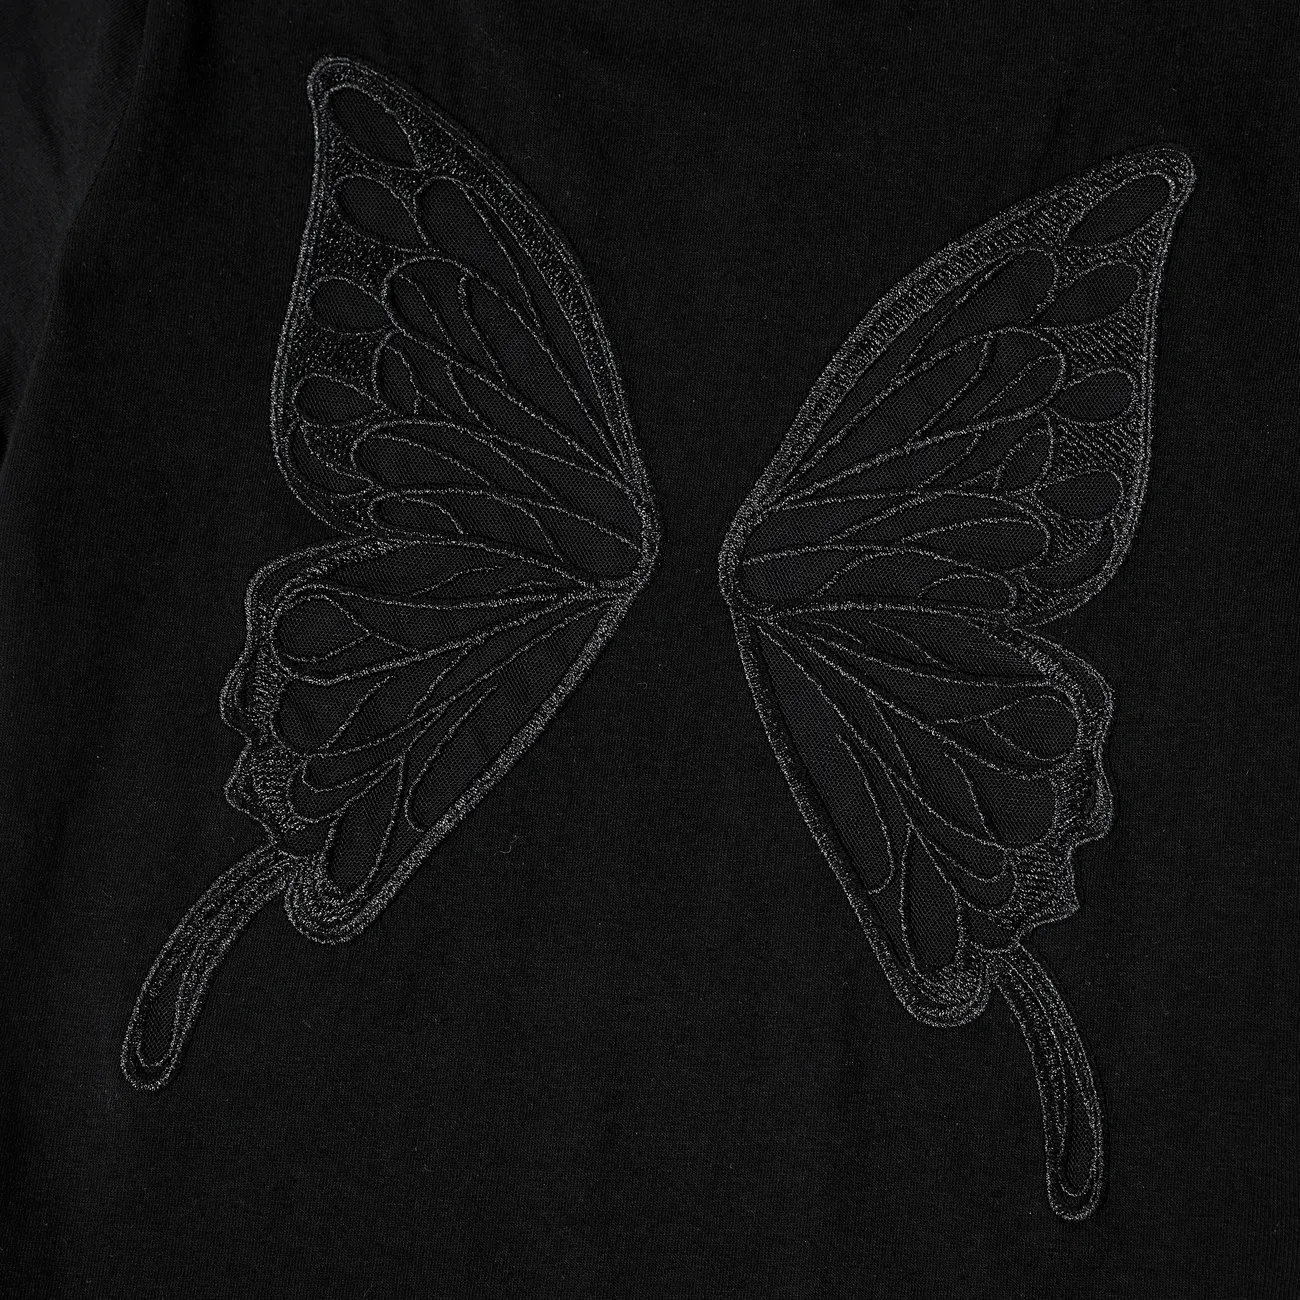 Mommy and Me Black Mesh Butterfly Wing Pattern Short-Sleeve Cotton Matching Top Black big image 1